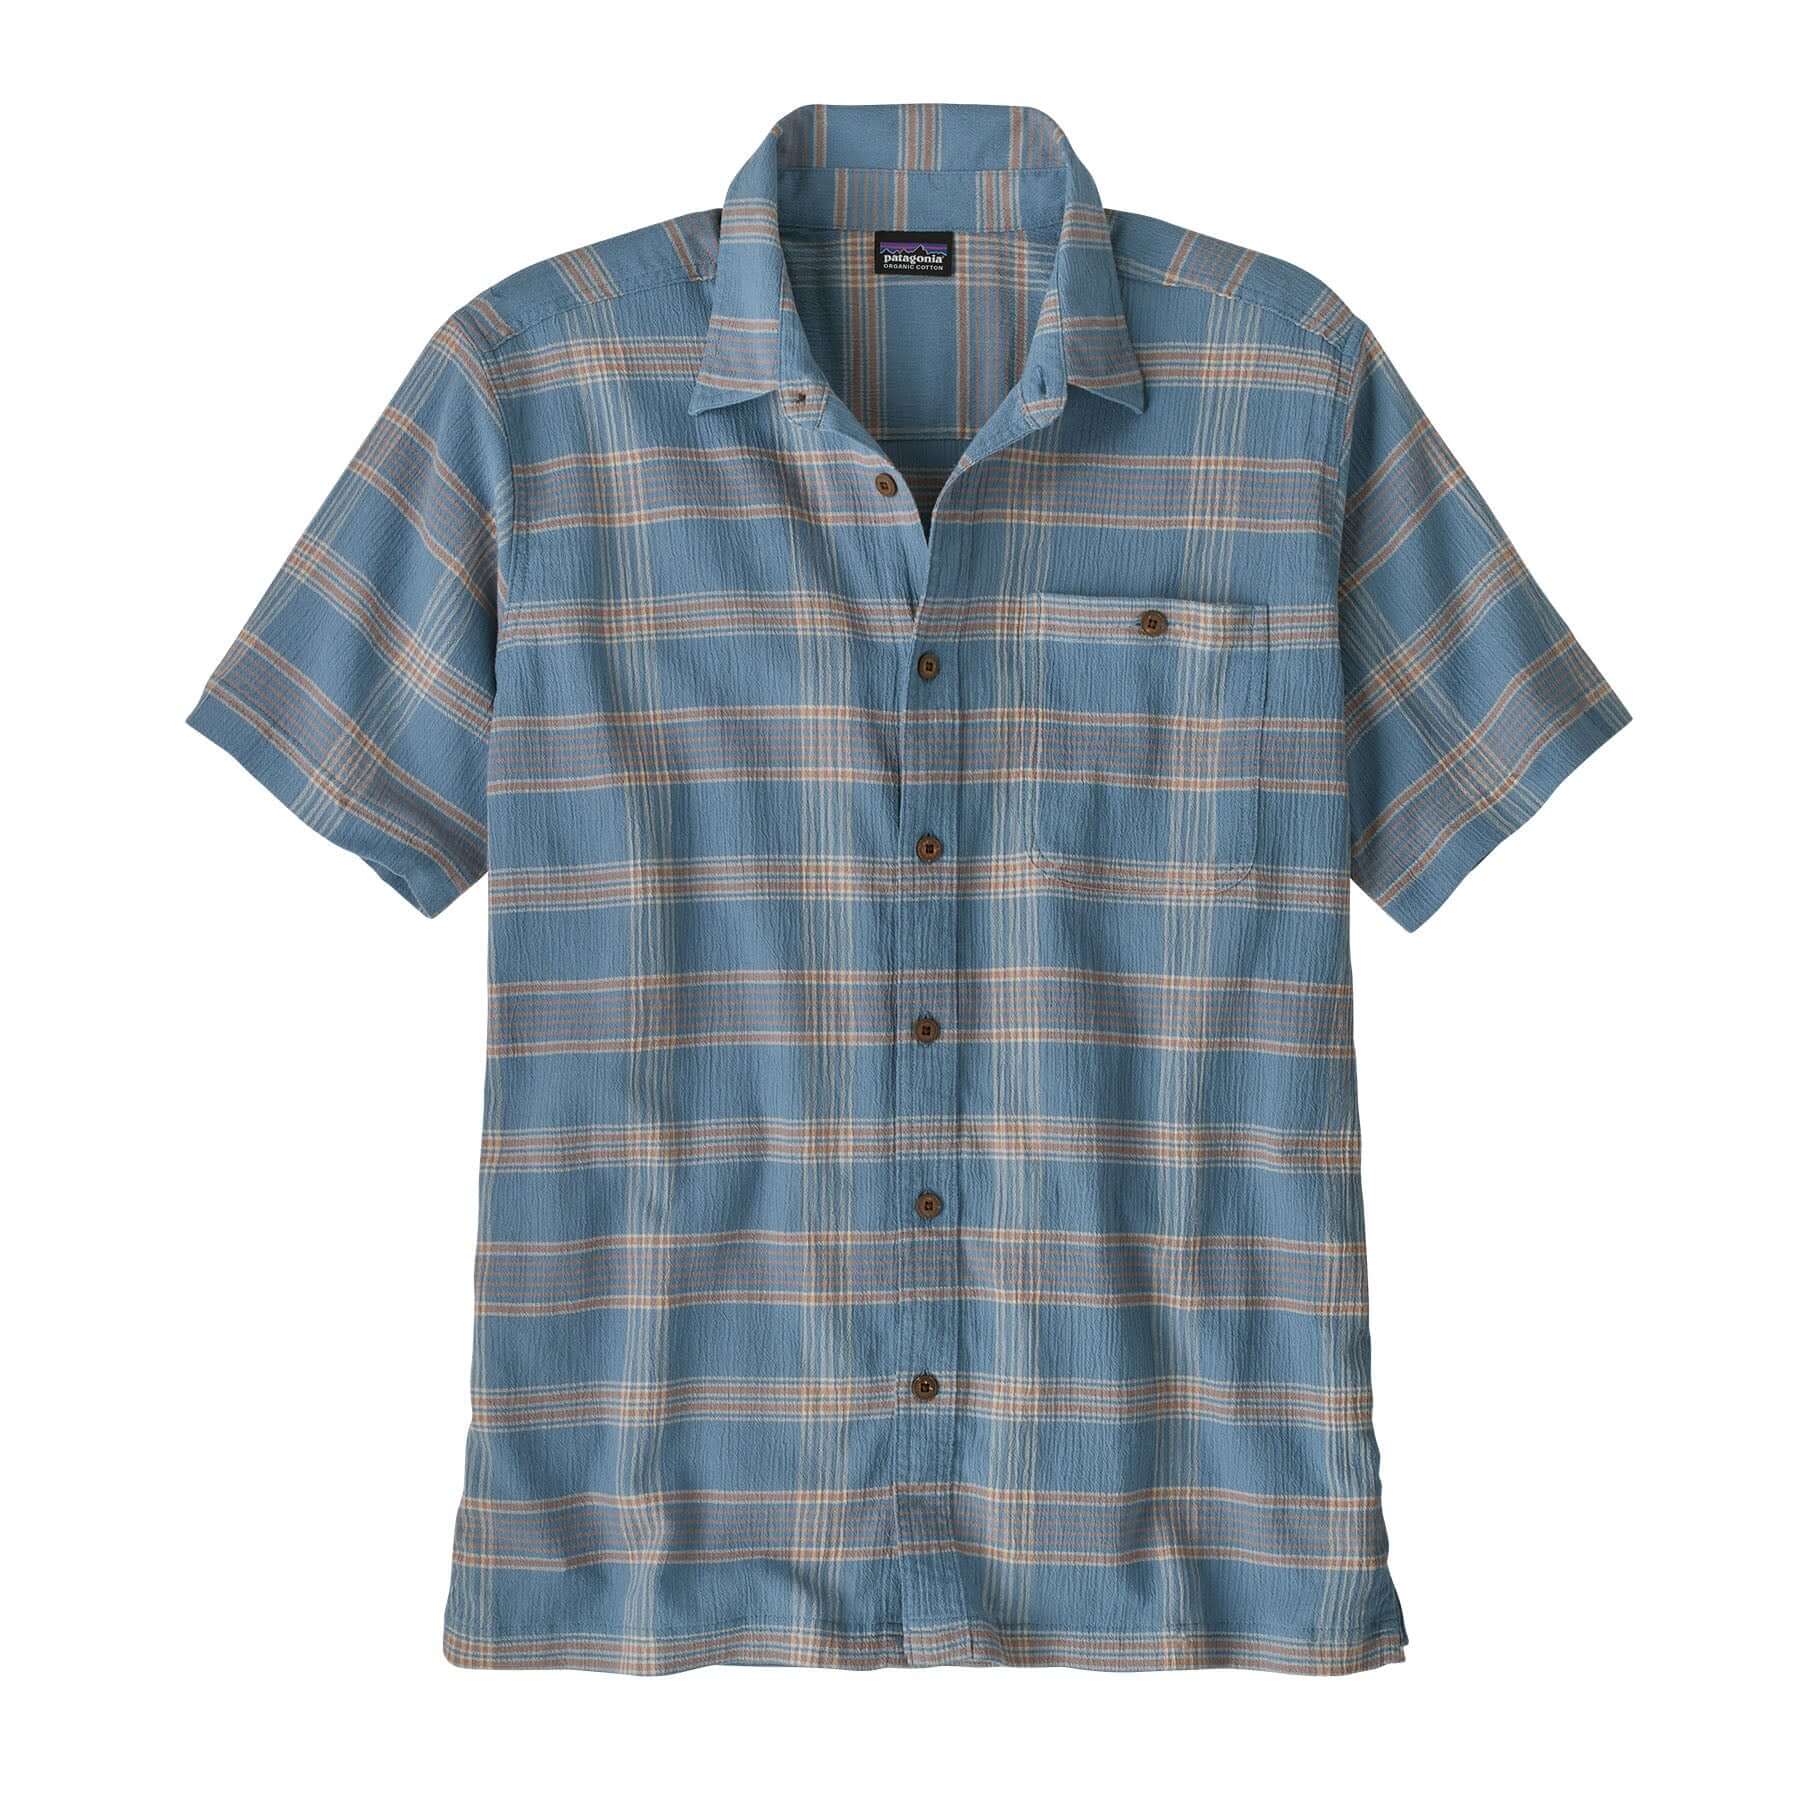 Men's A/C Shirt in Discovery: Light Plume Grey | Patagonia Bend